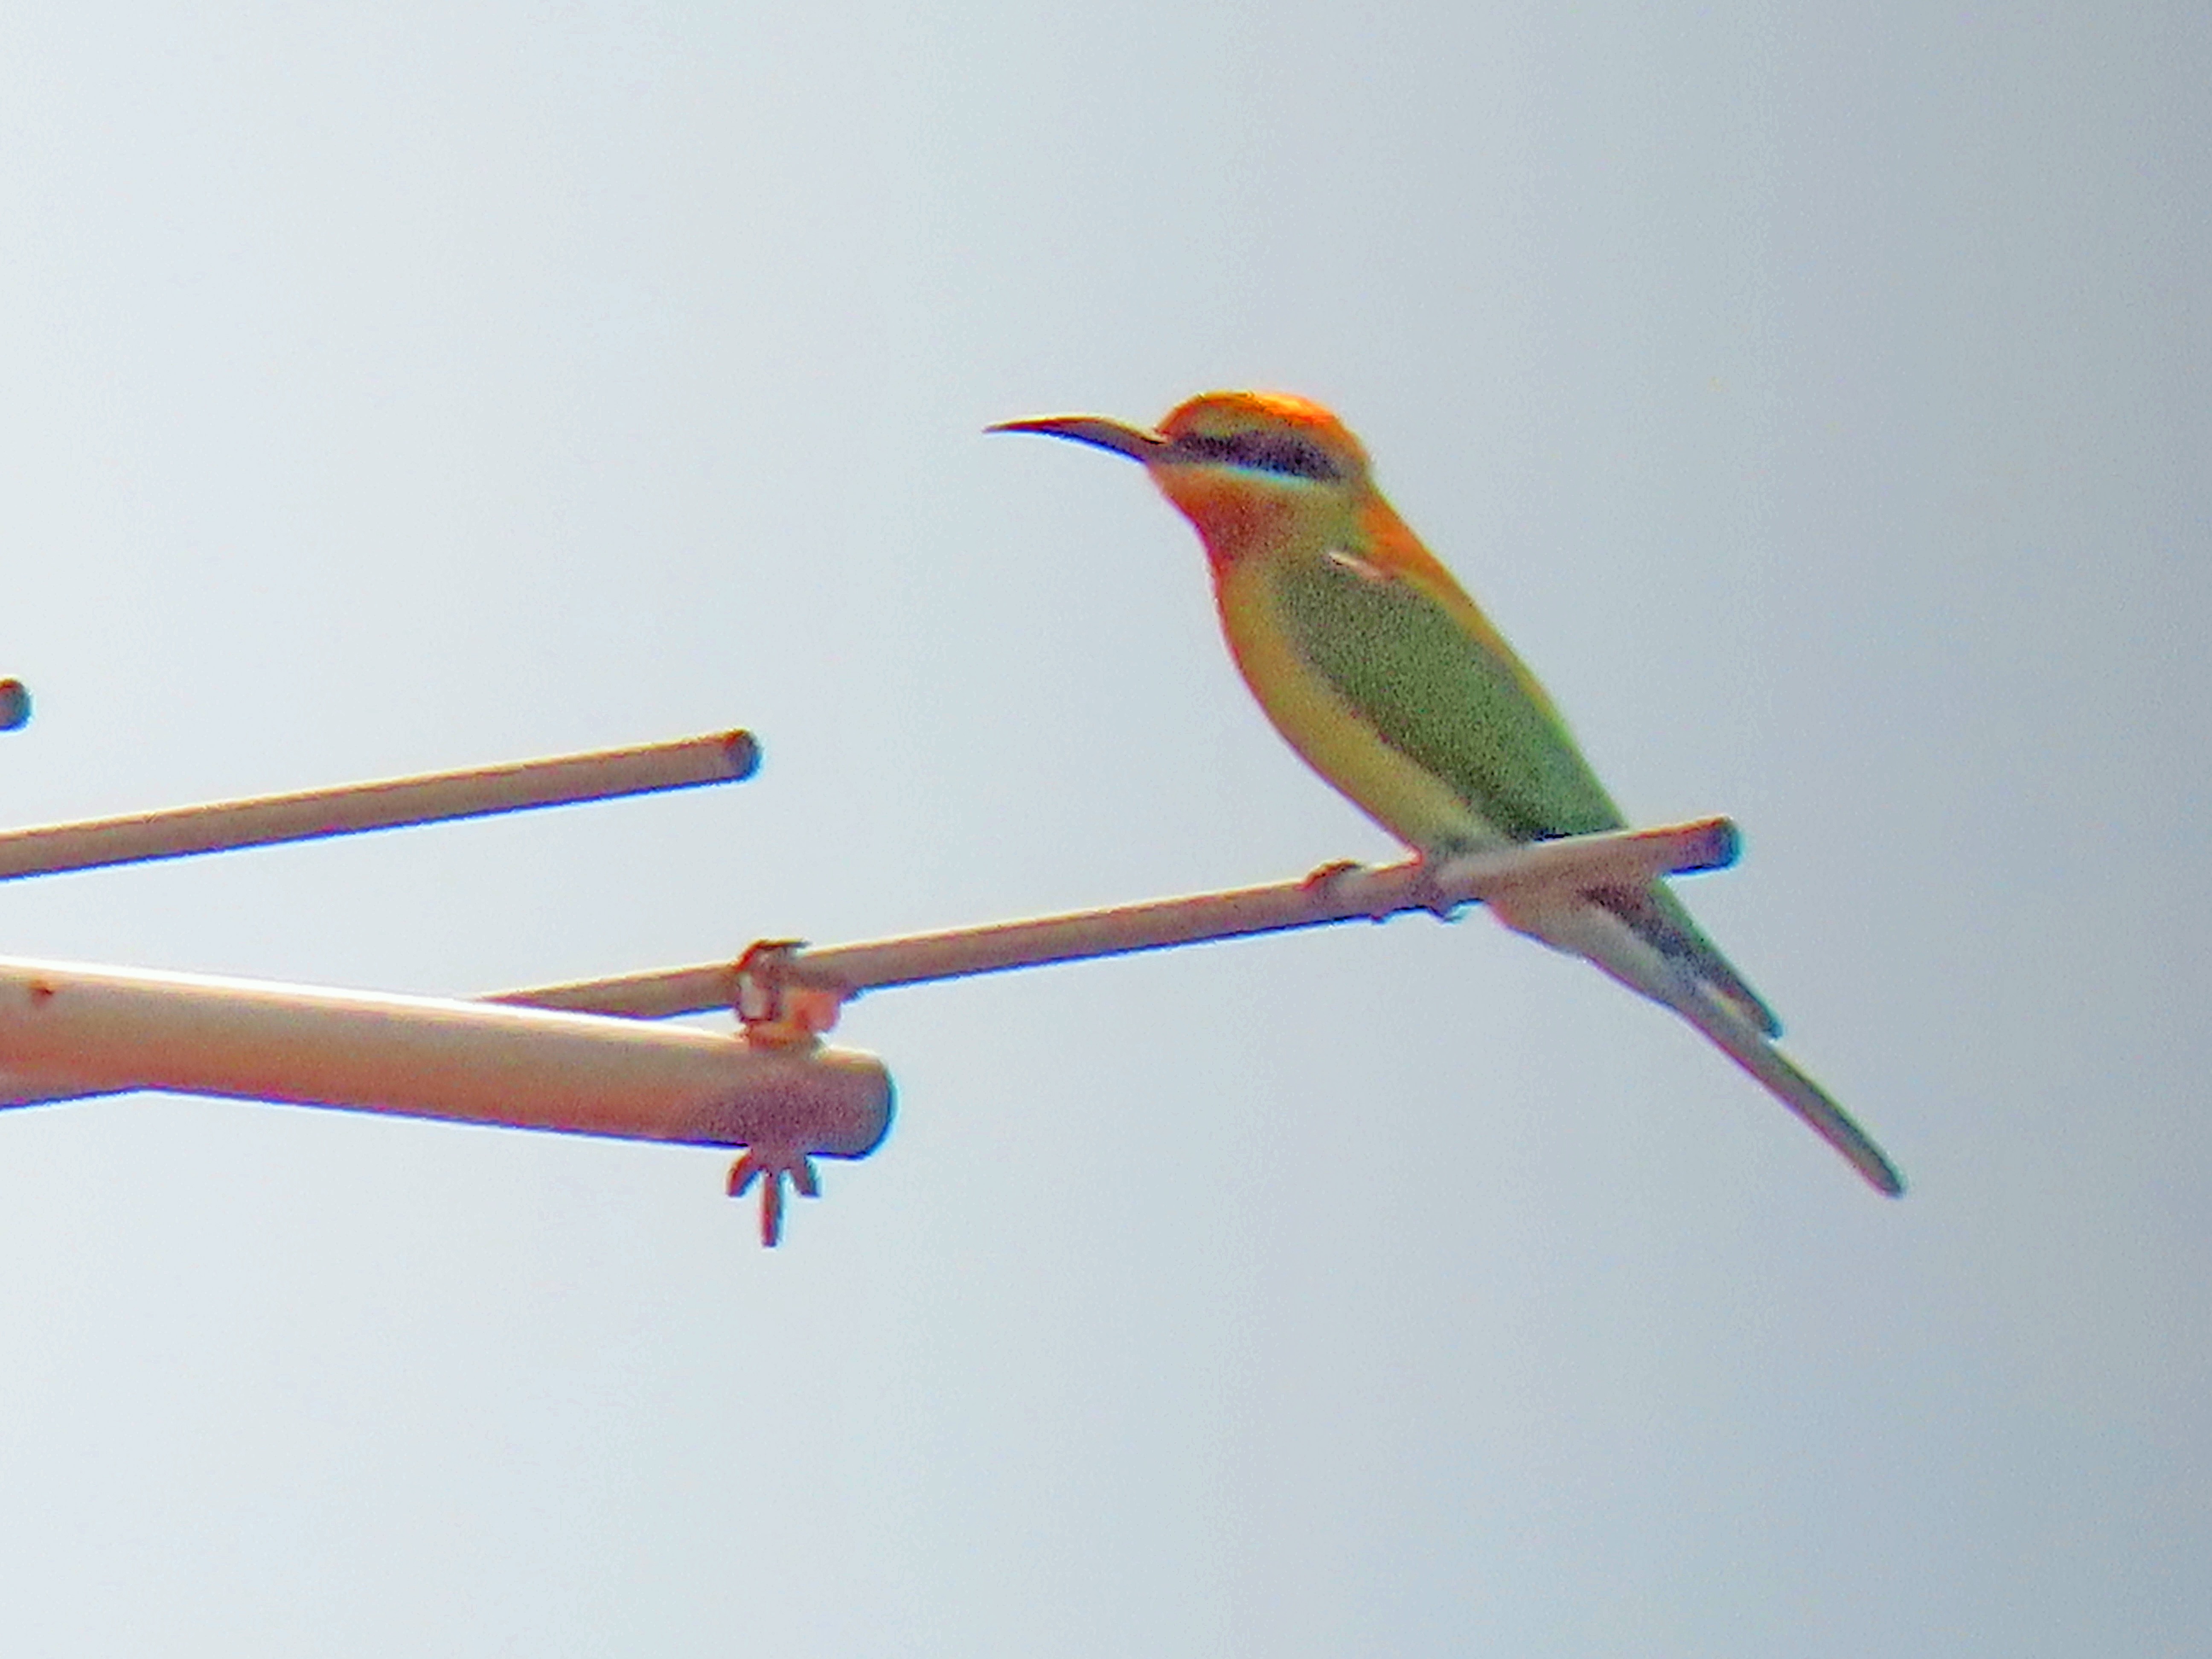 Blue-tailed bee-eater